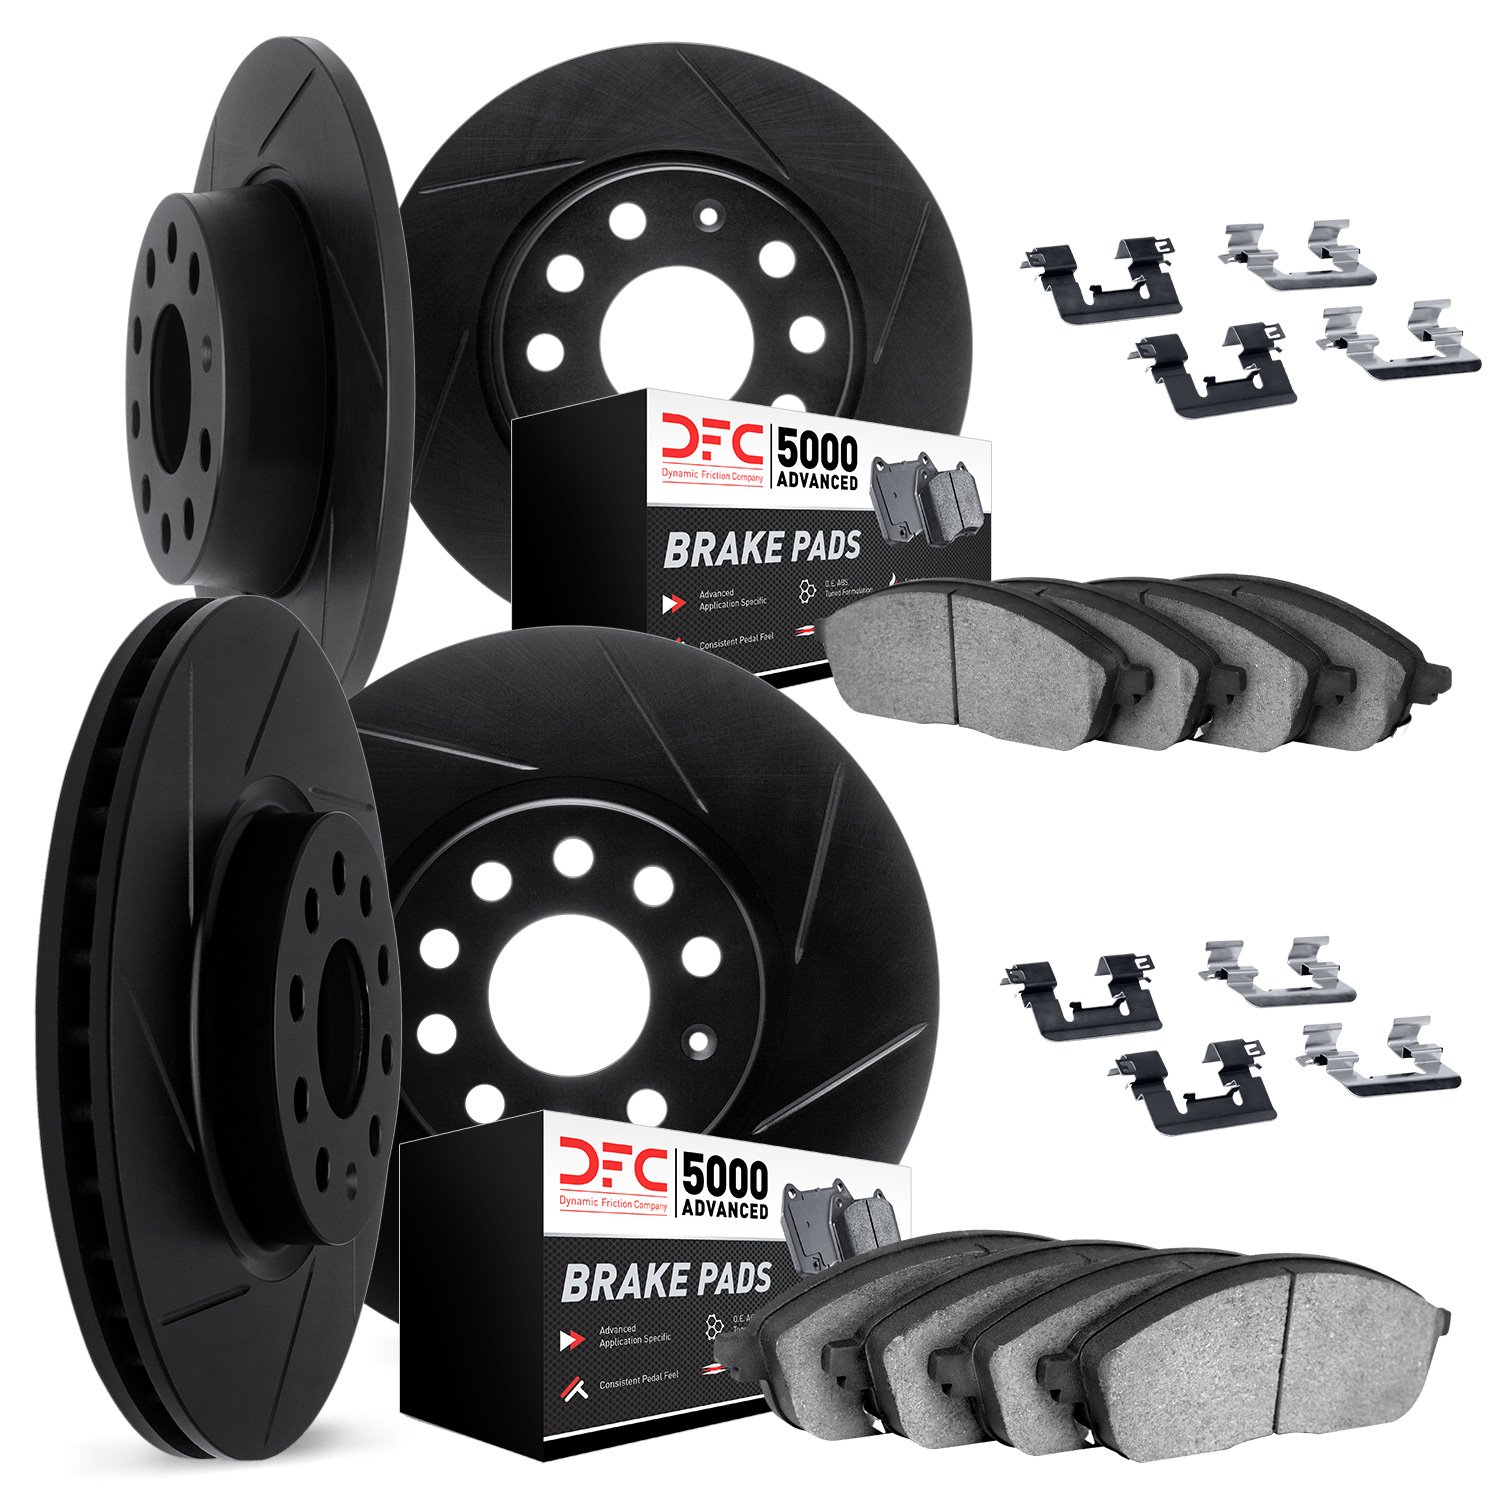 3514-59026 Slotted Brake Rotors w/5000 Advanced Brake Pads Kit & Hardware [Black], 2003-2006 Acura/Honda, Position: Front and Re